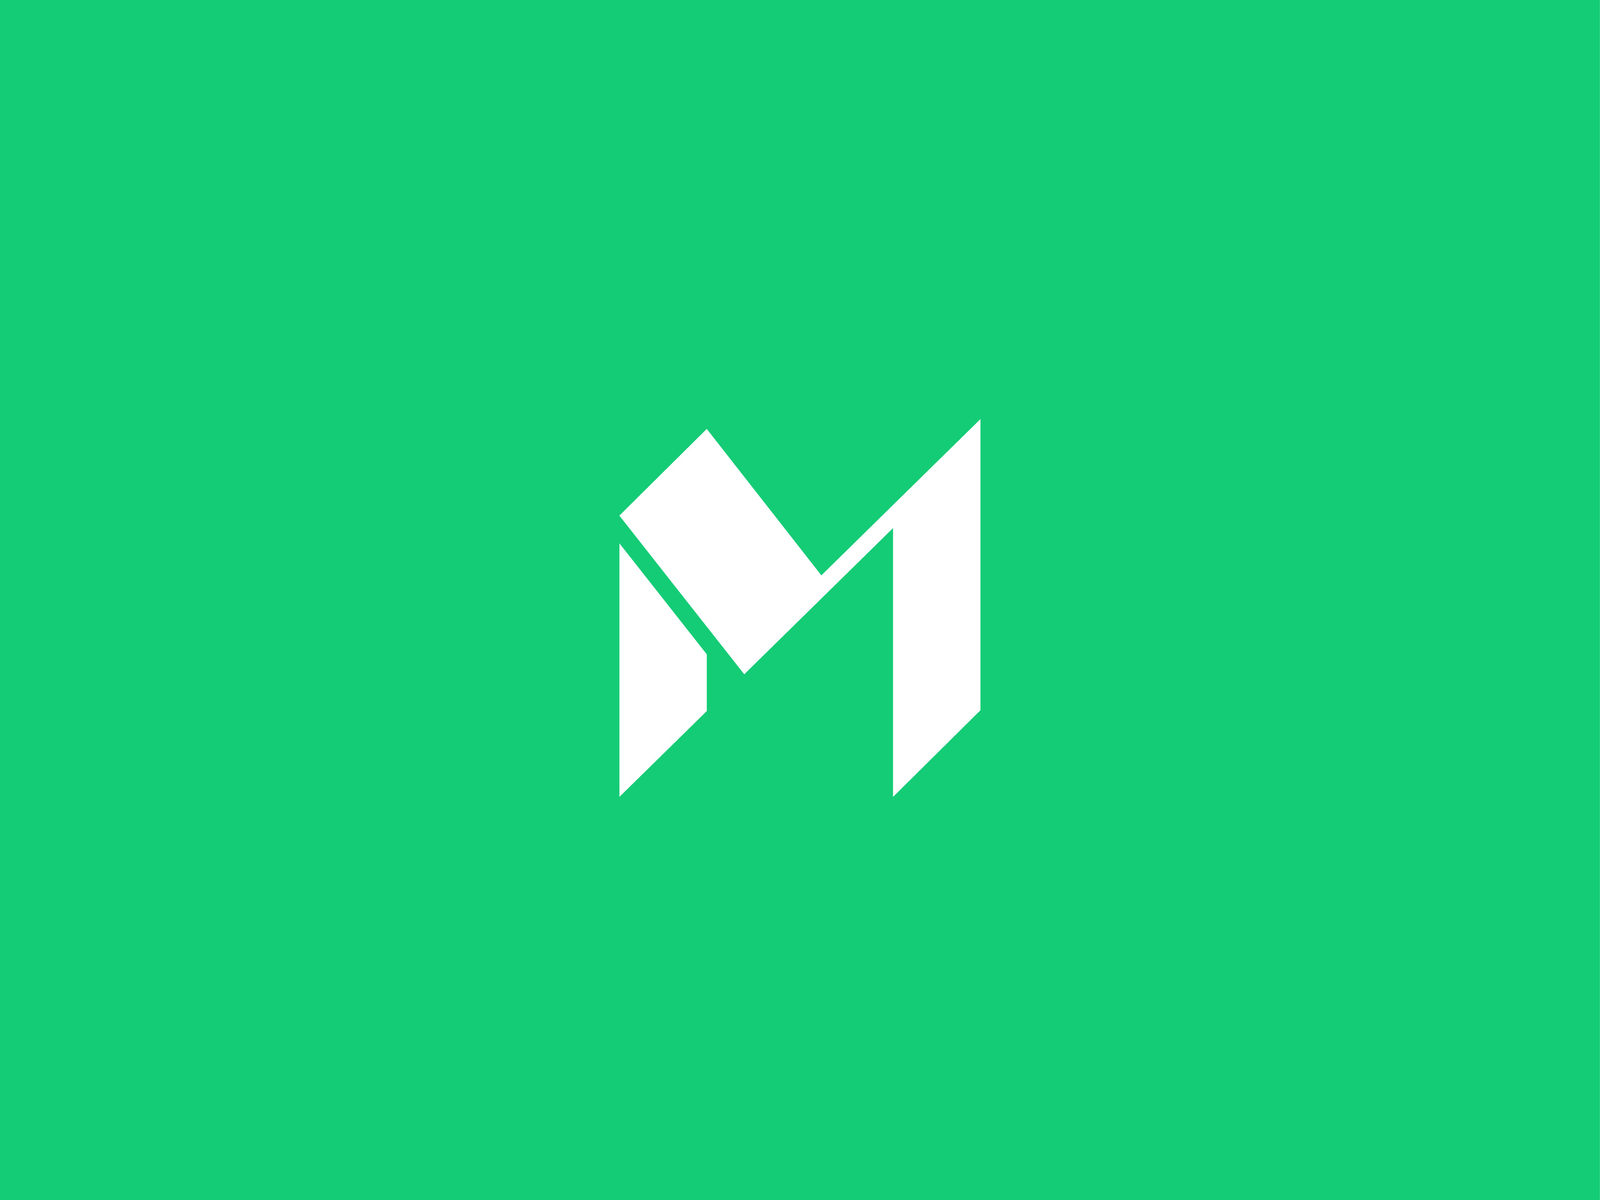 Morenotes by Abdulsamad Umar on Dribbble